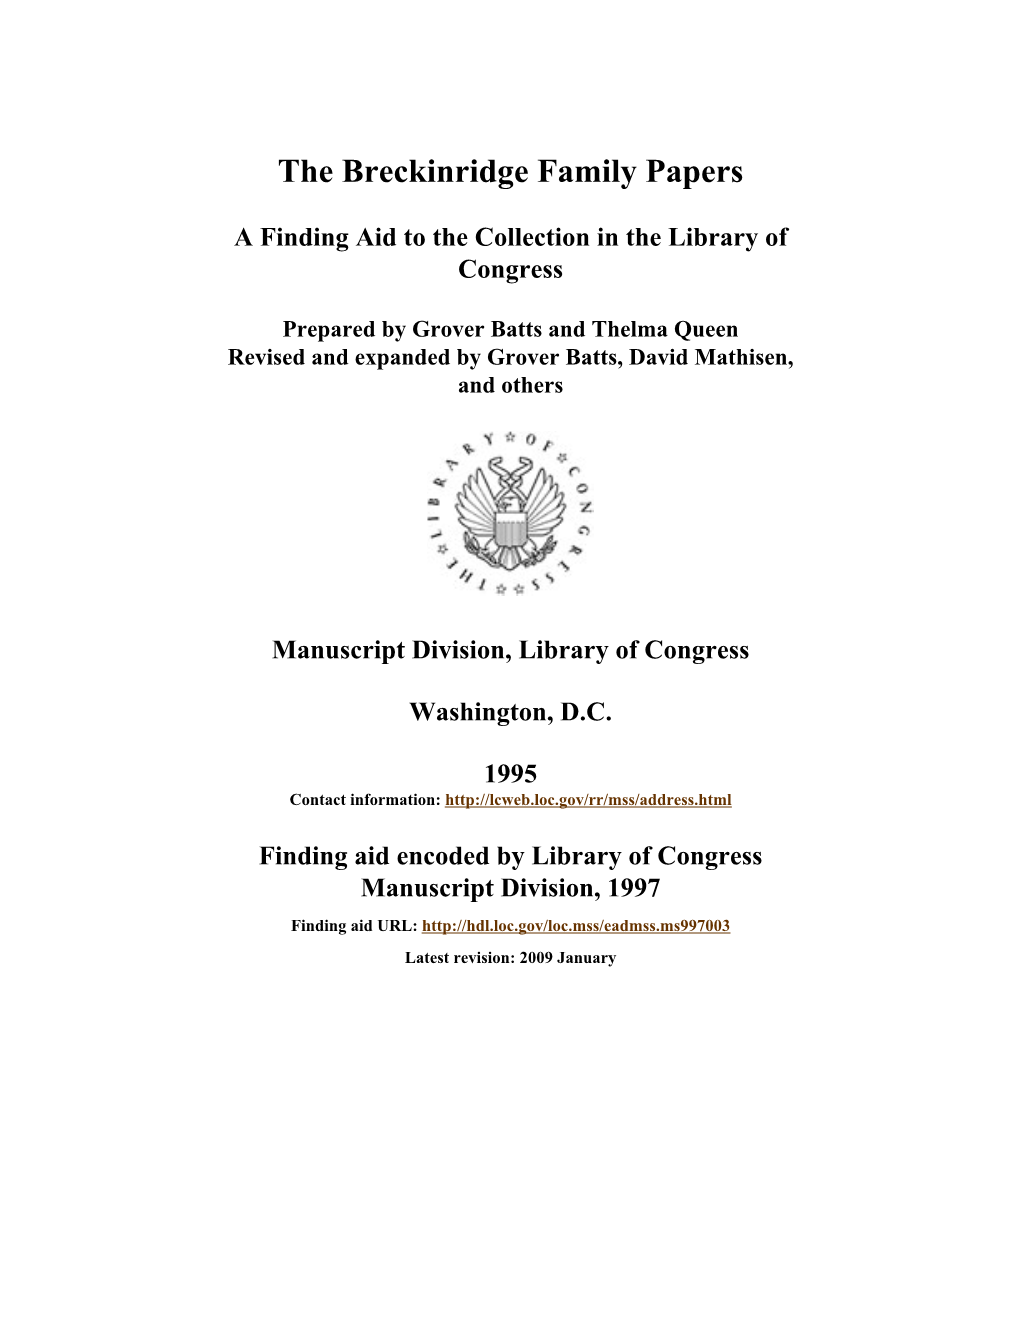 Breckinridge Family Papers